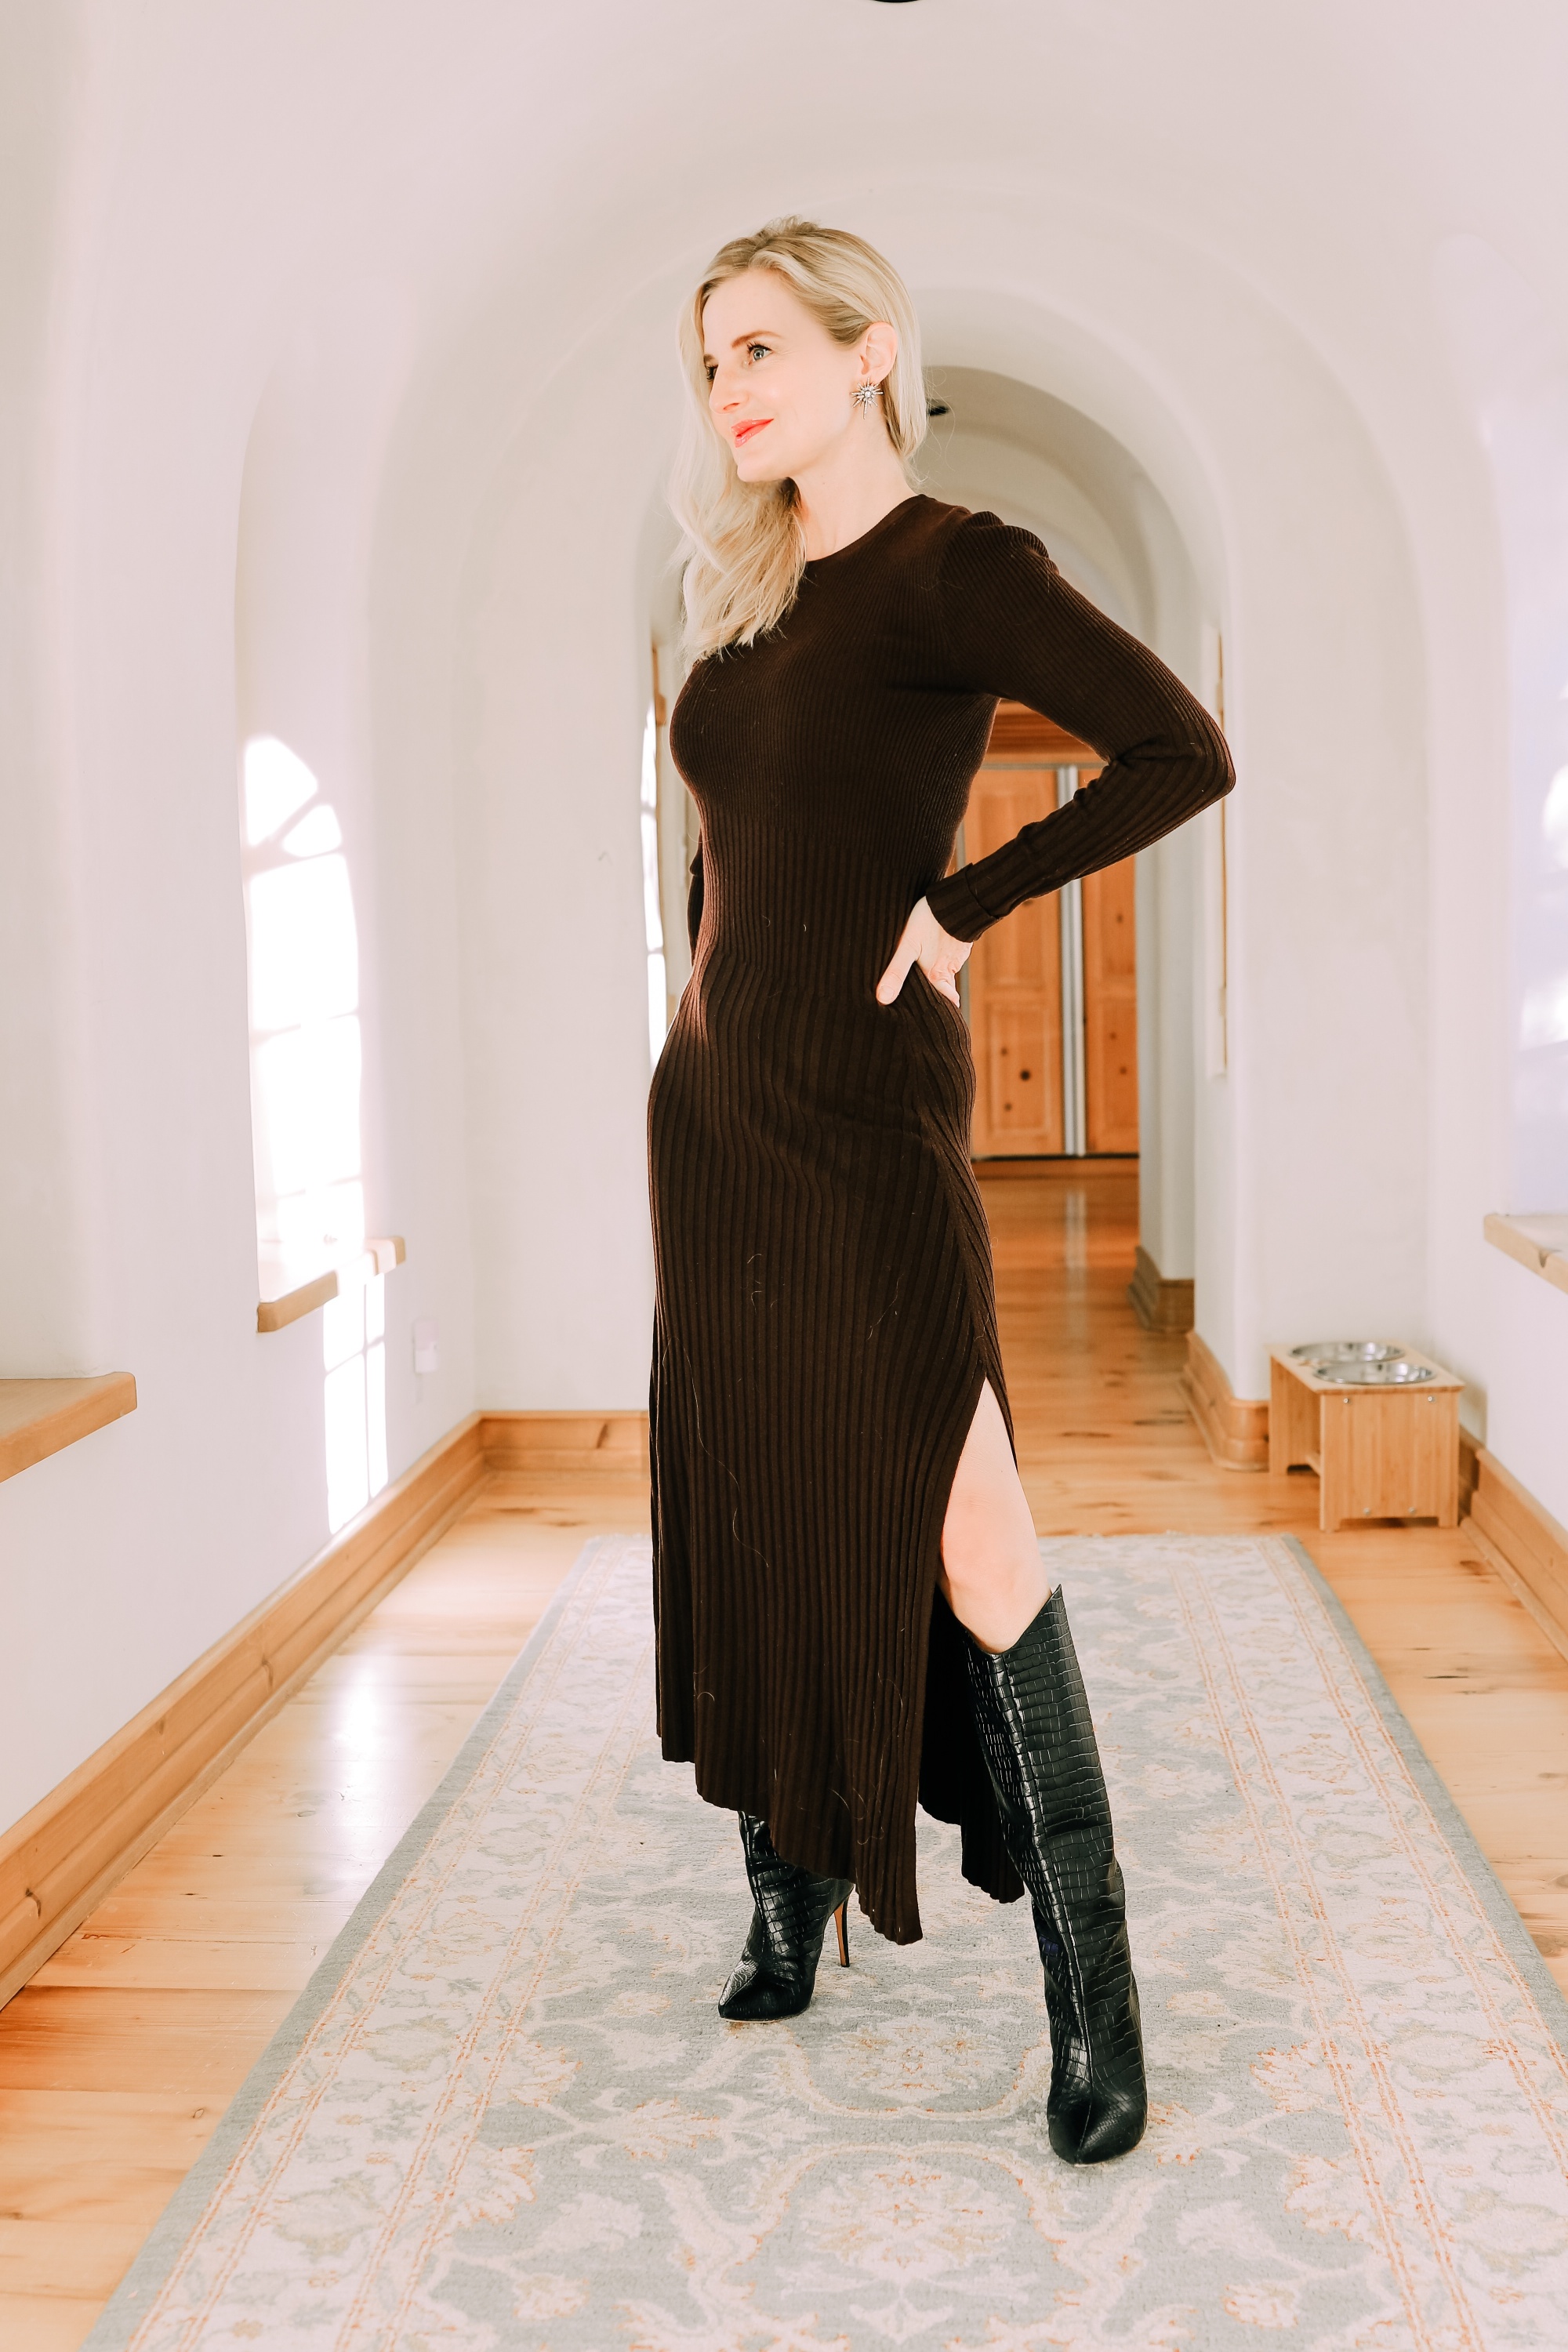 Brown Maxi Dress with Black Knee-High Boots